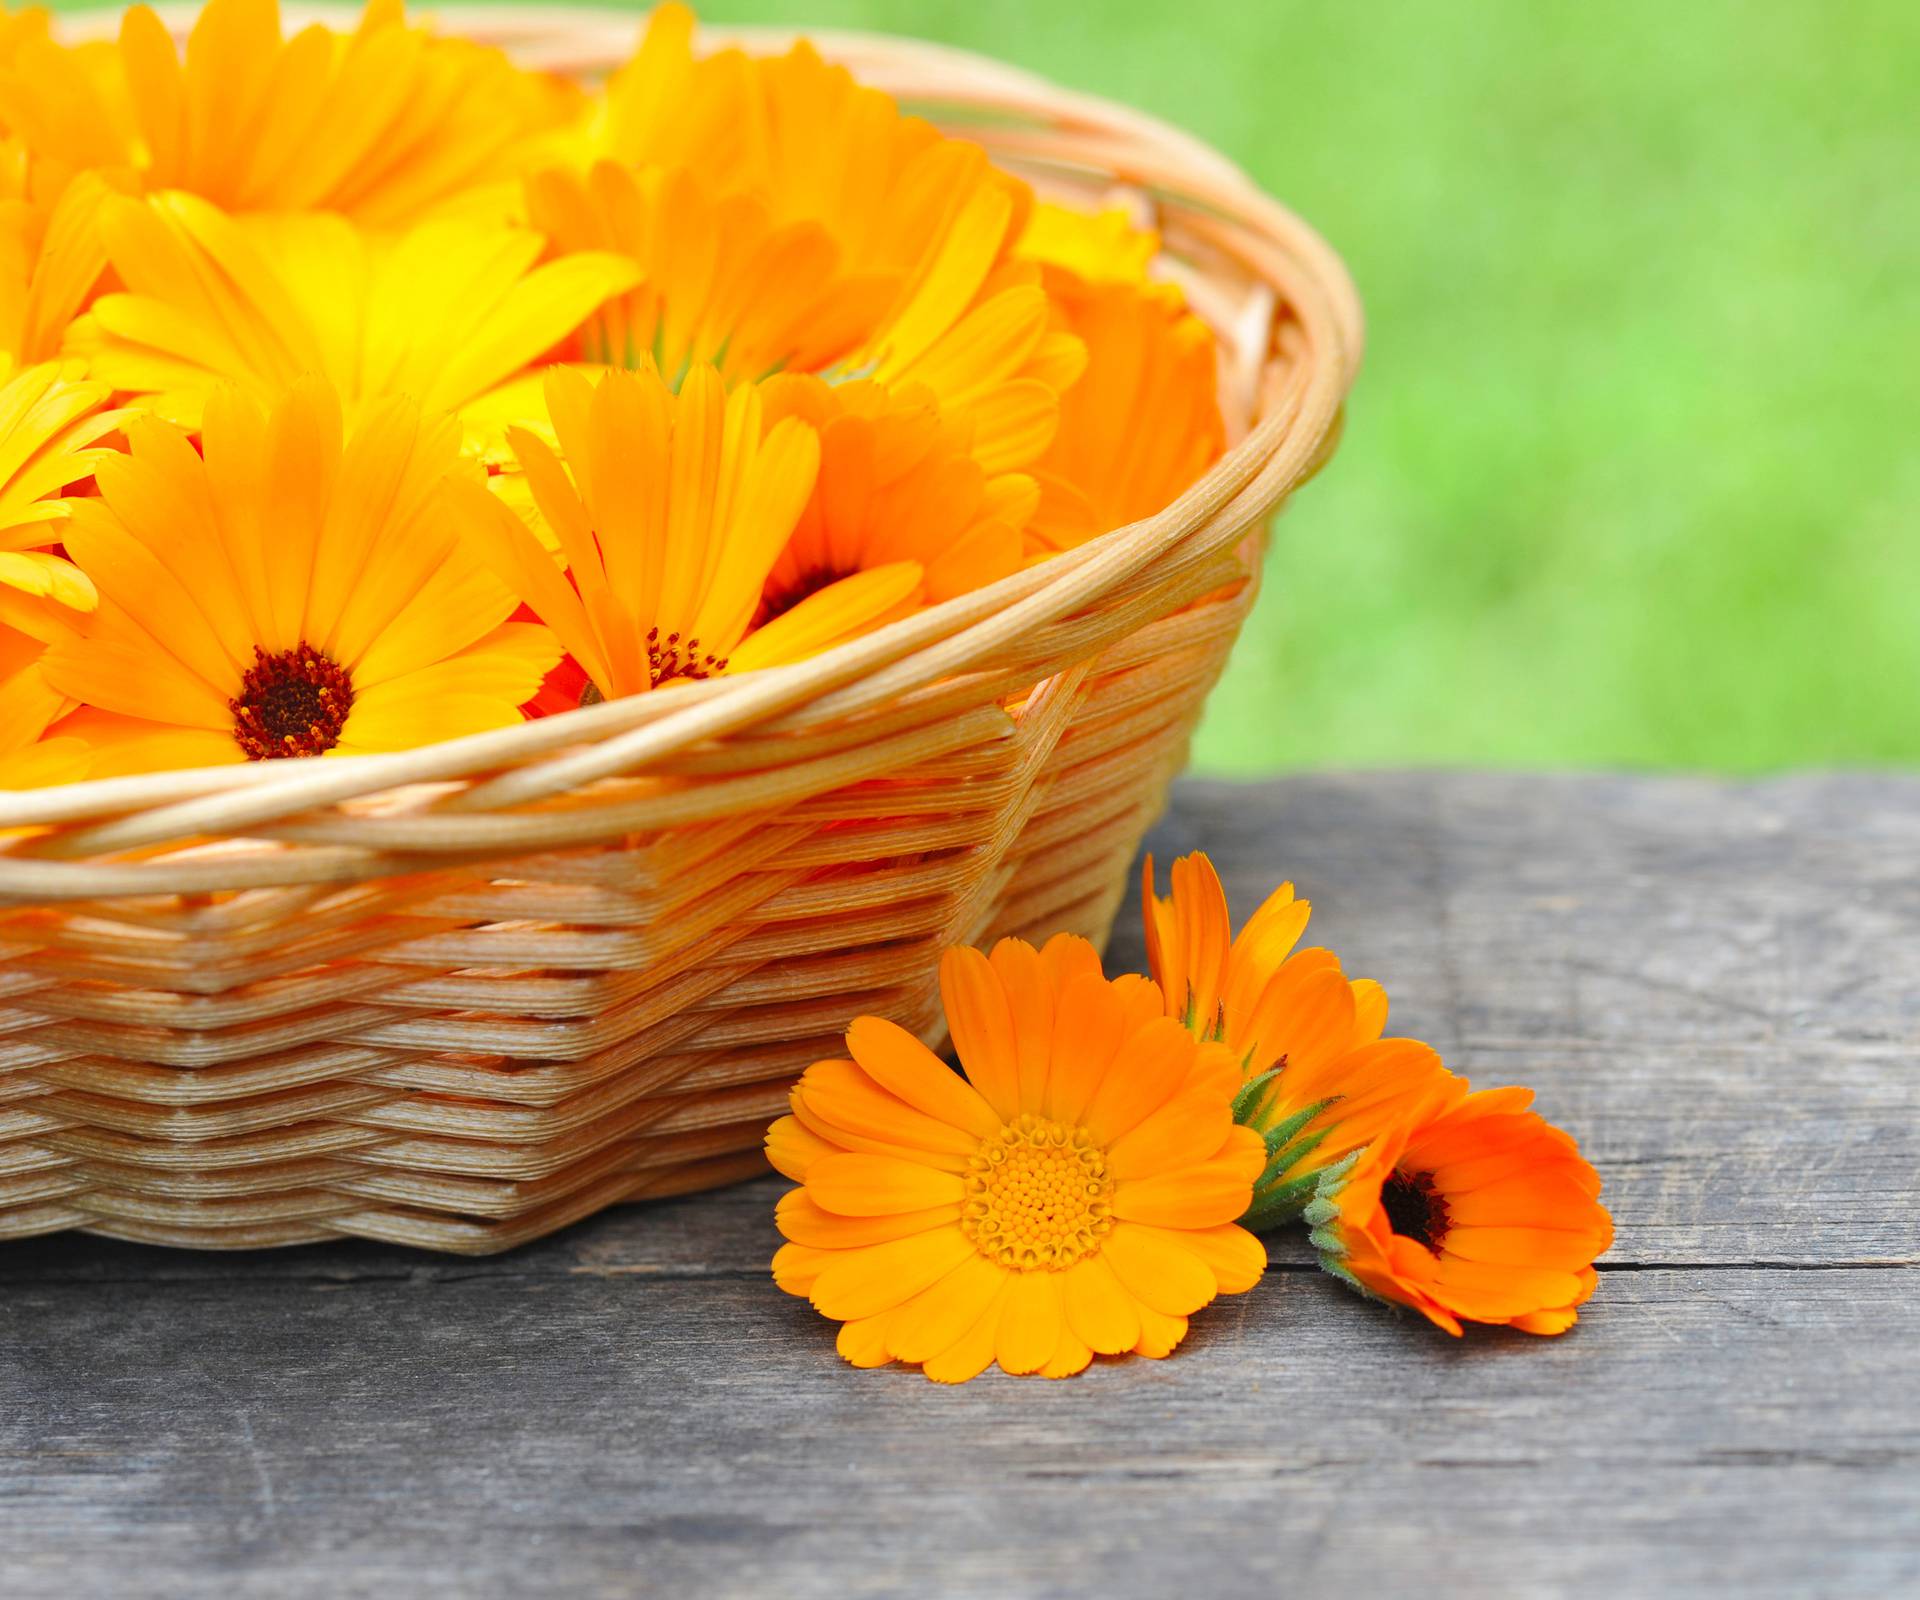 Fresh calendula flowers are in a basket on wooden table